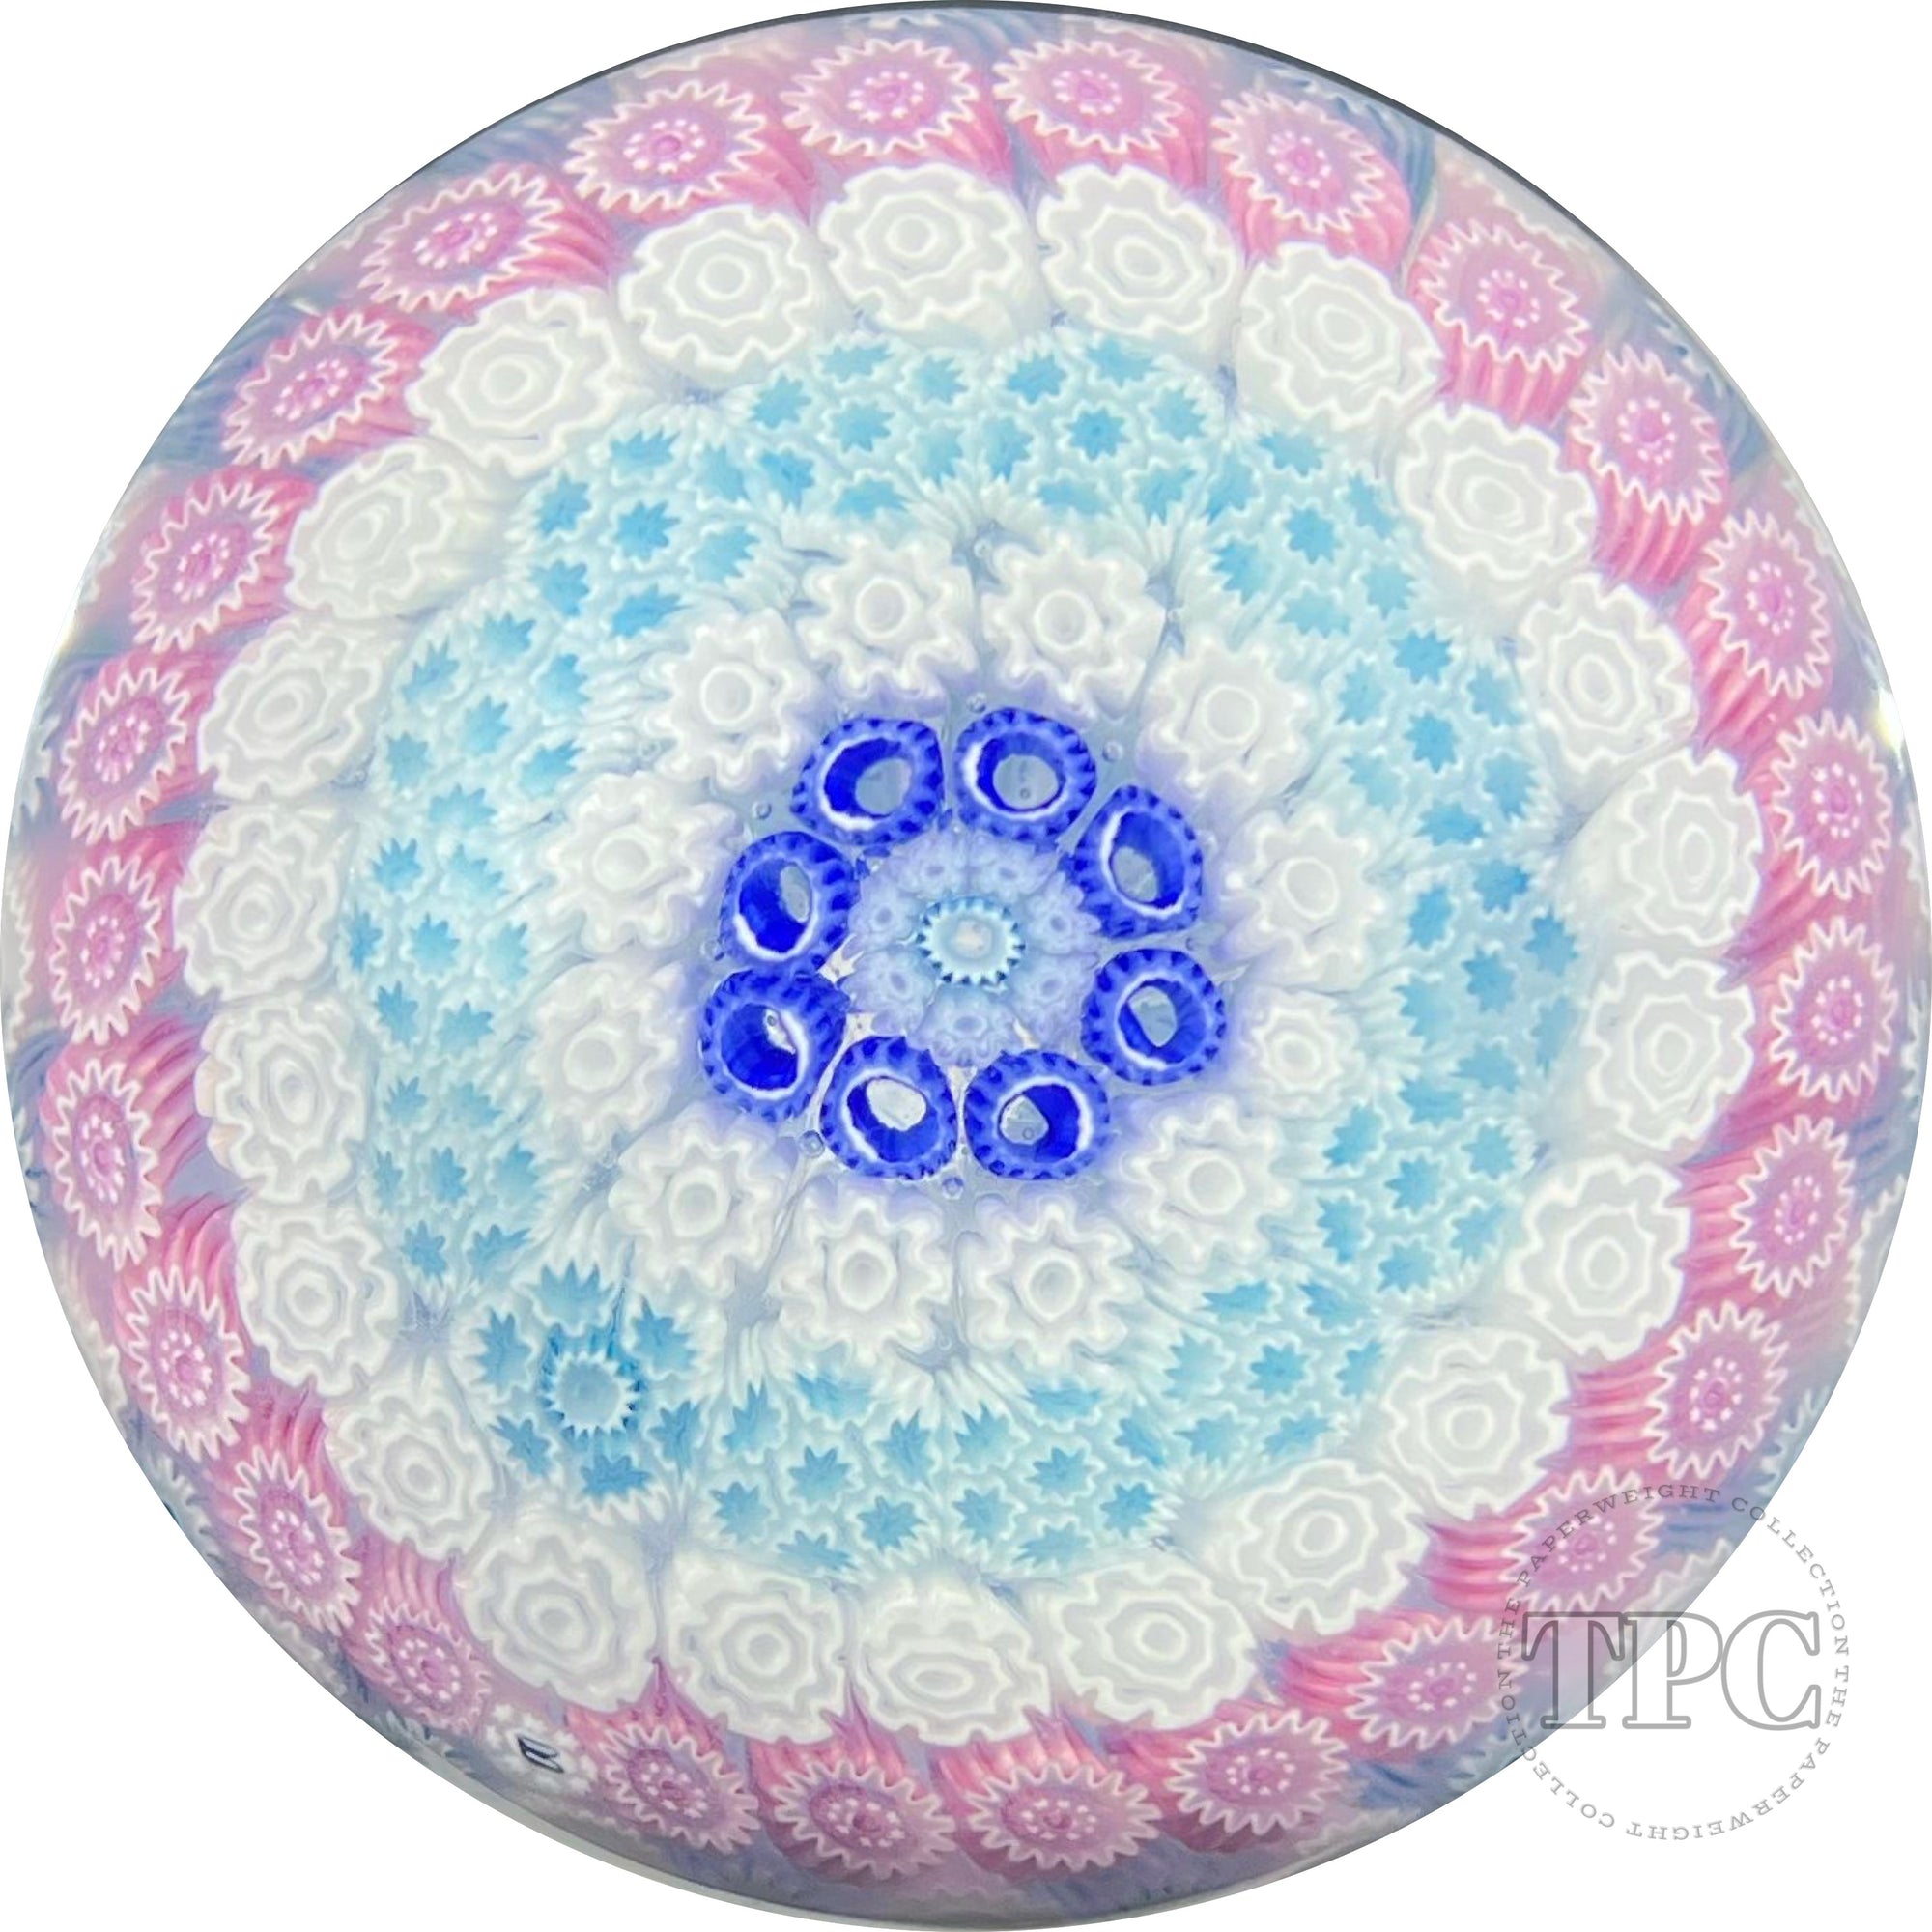 Jim Brown 2007 Glass Art Paperweight Cotton Candy Concentric with Complex Pink & Blue Millefiori in Stave Basket